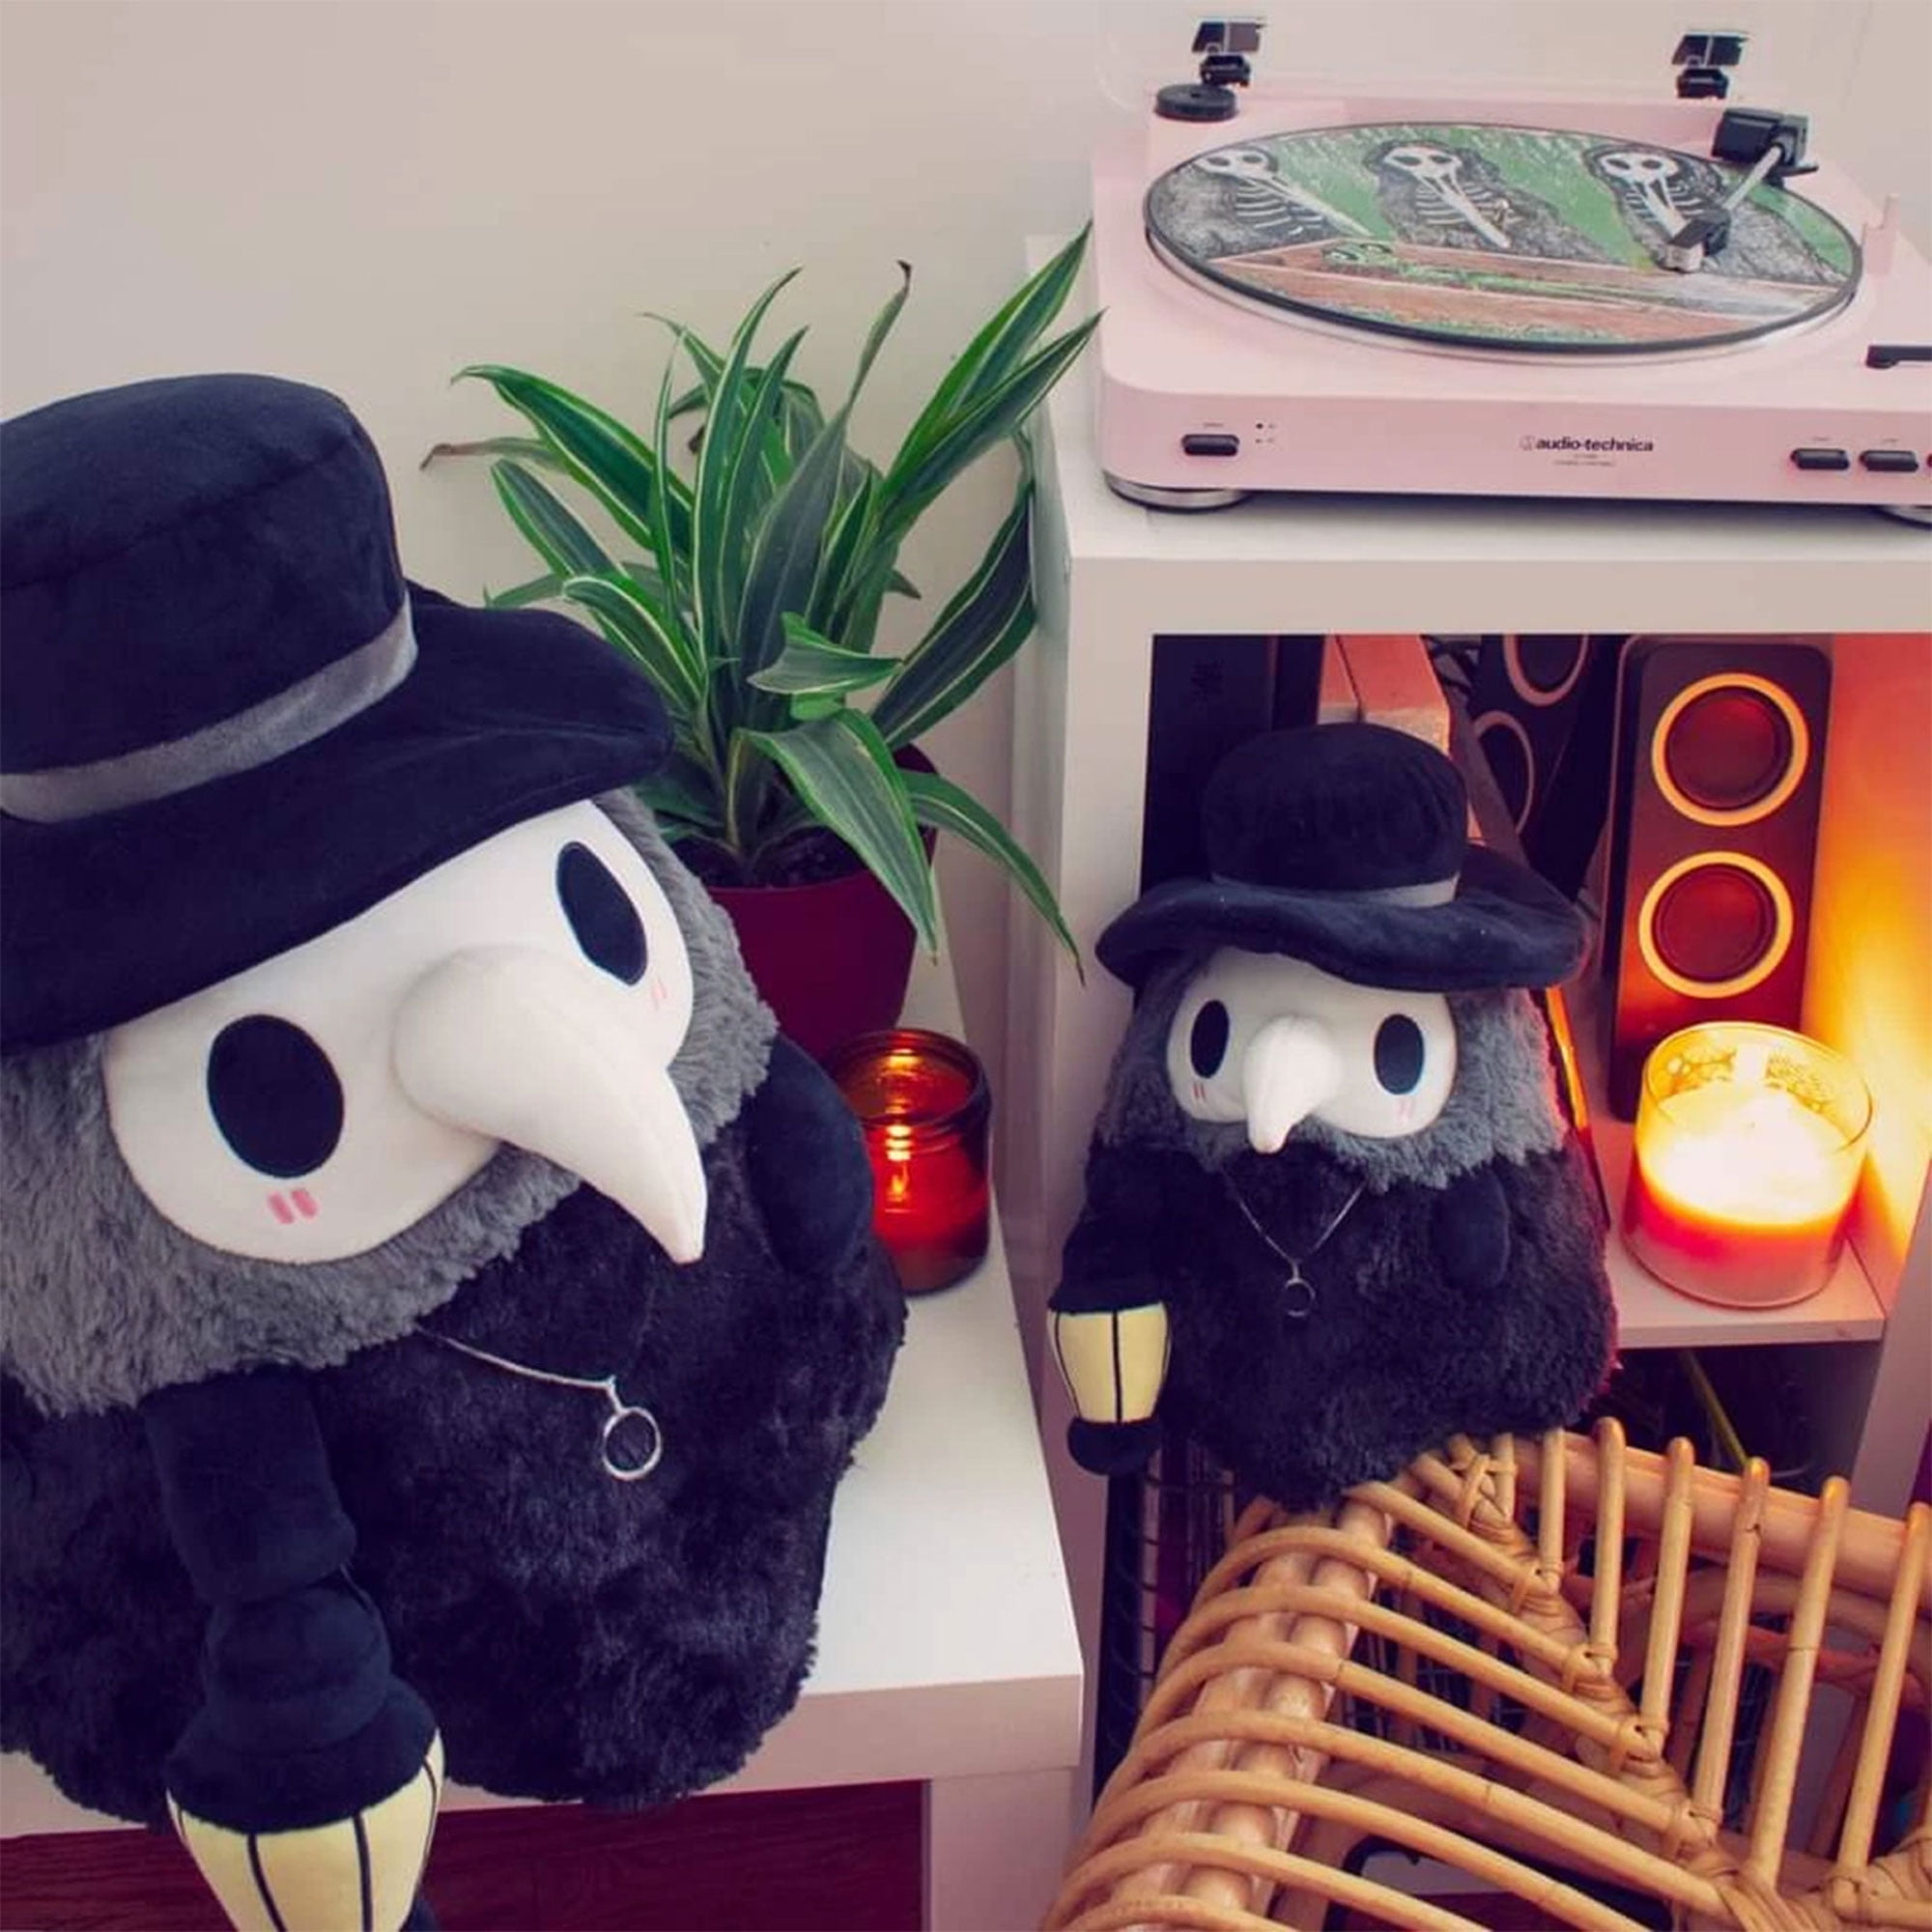 Fluffy Plague Doctor Plush Doll Toys Best Gifts for Doctor Nurse and Kids Glow in Dark 20cm Stuffed Crow Doll